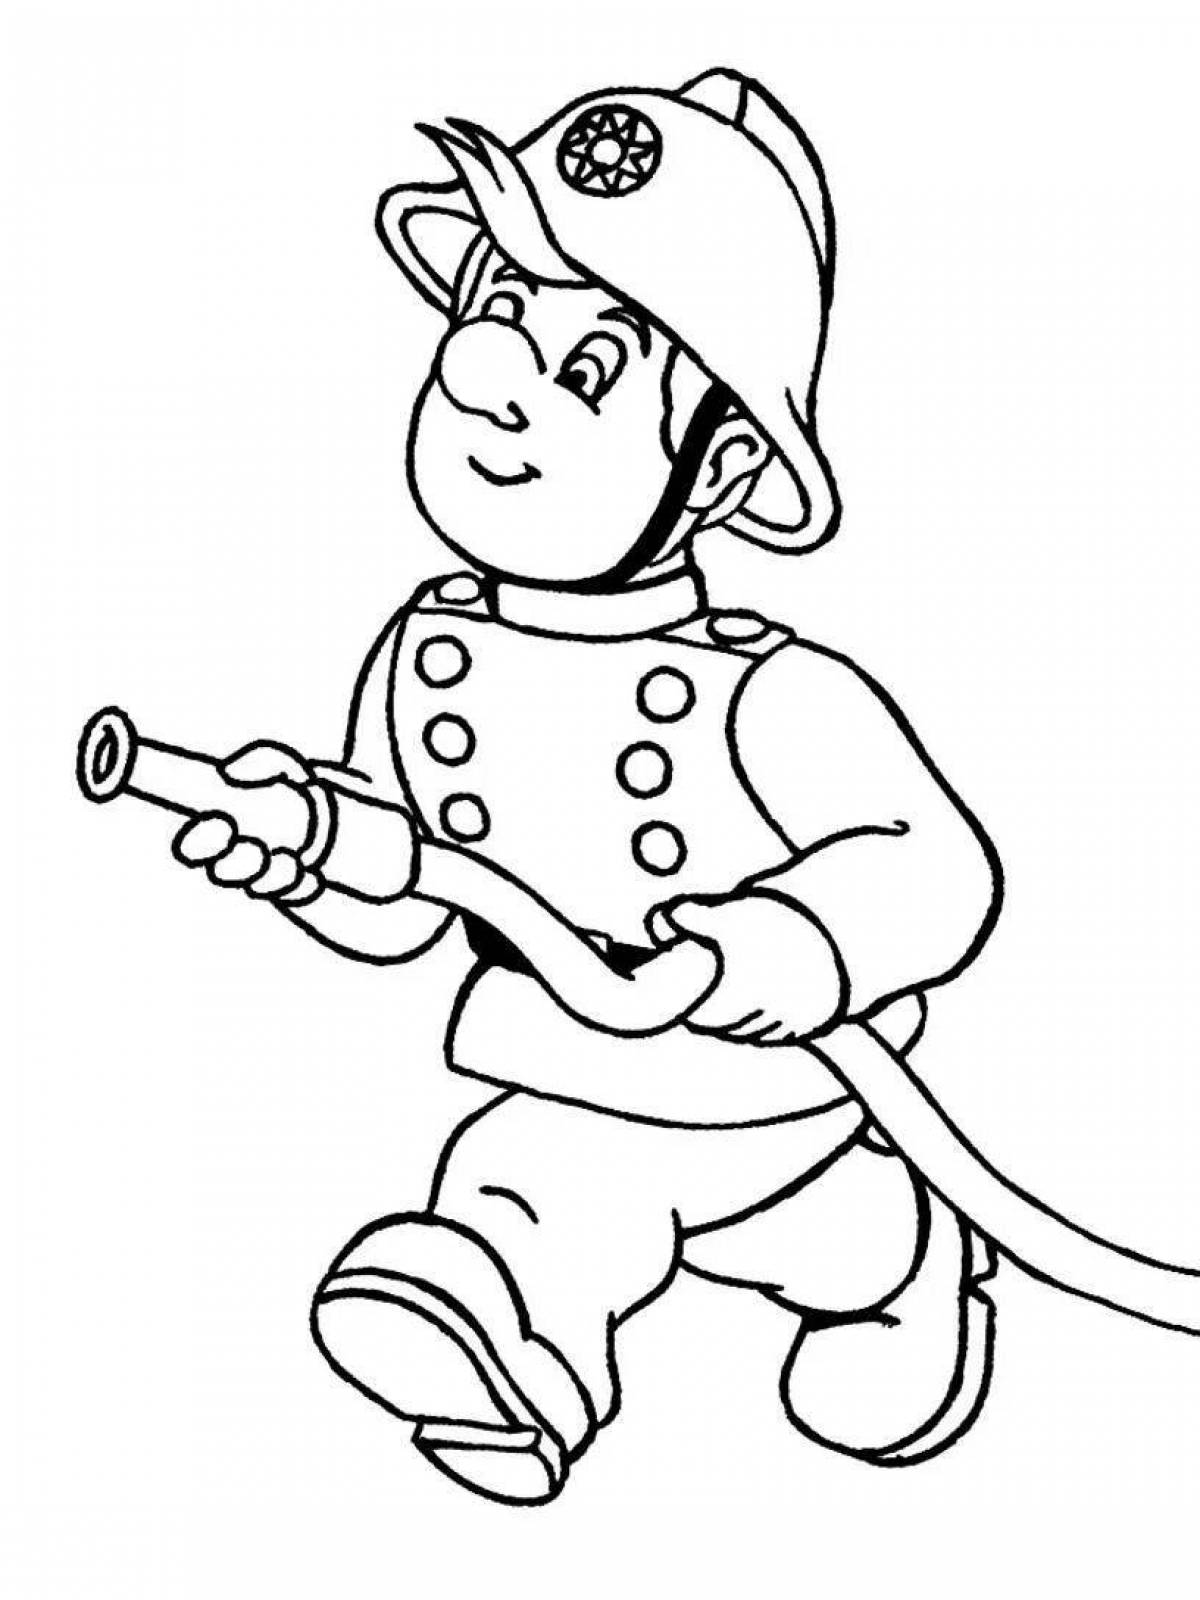 Great fireman coloring pages for kids